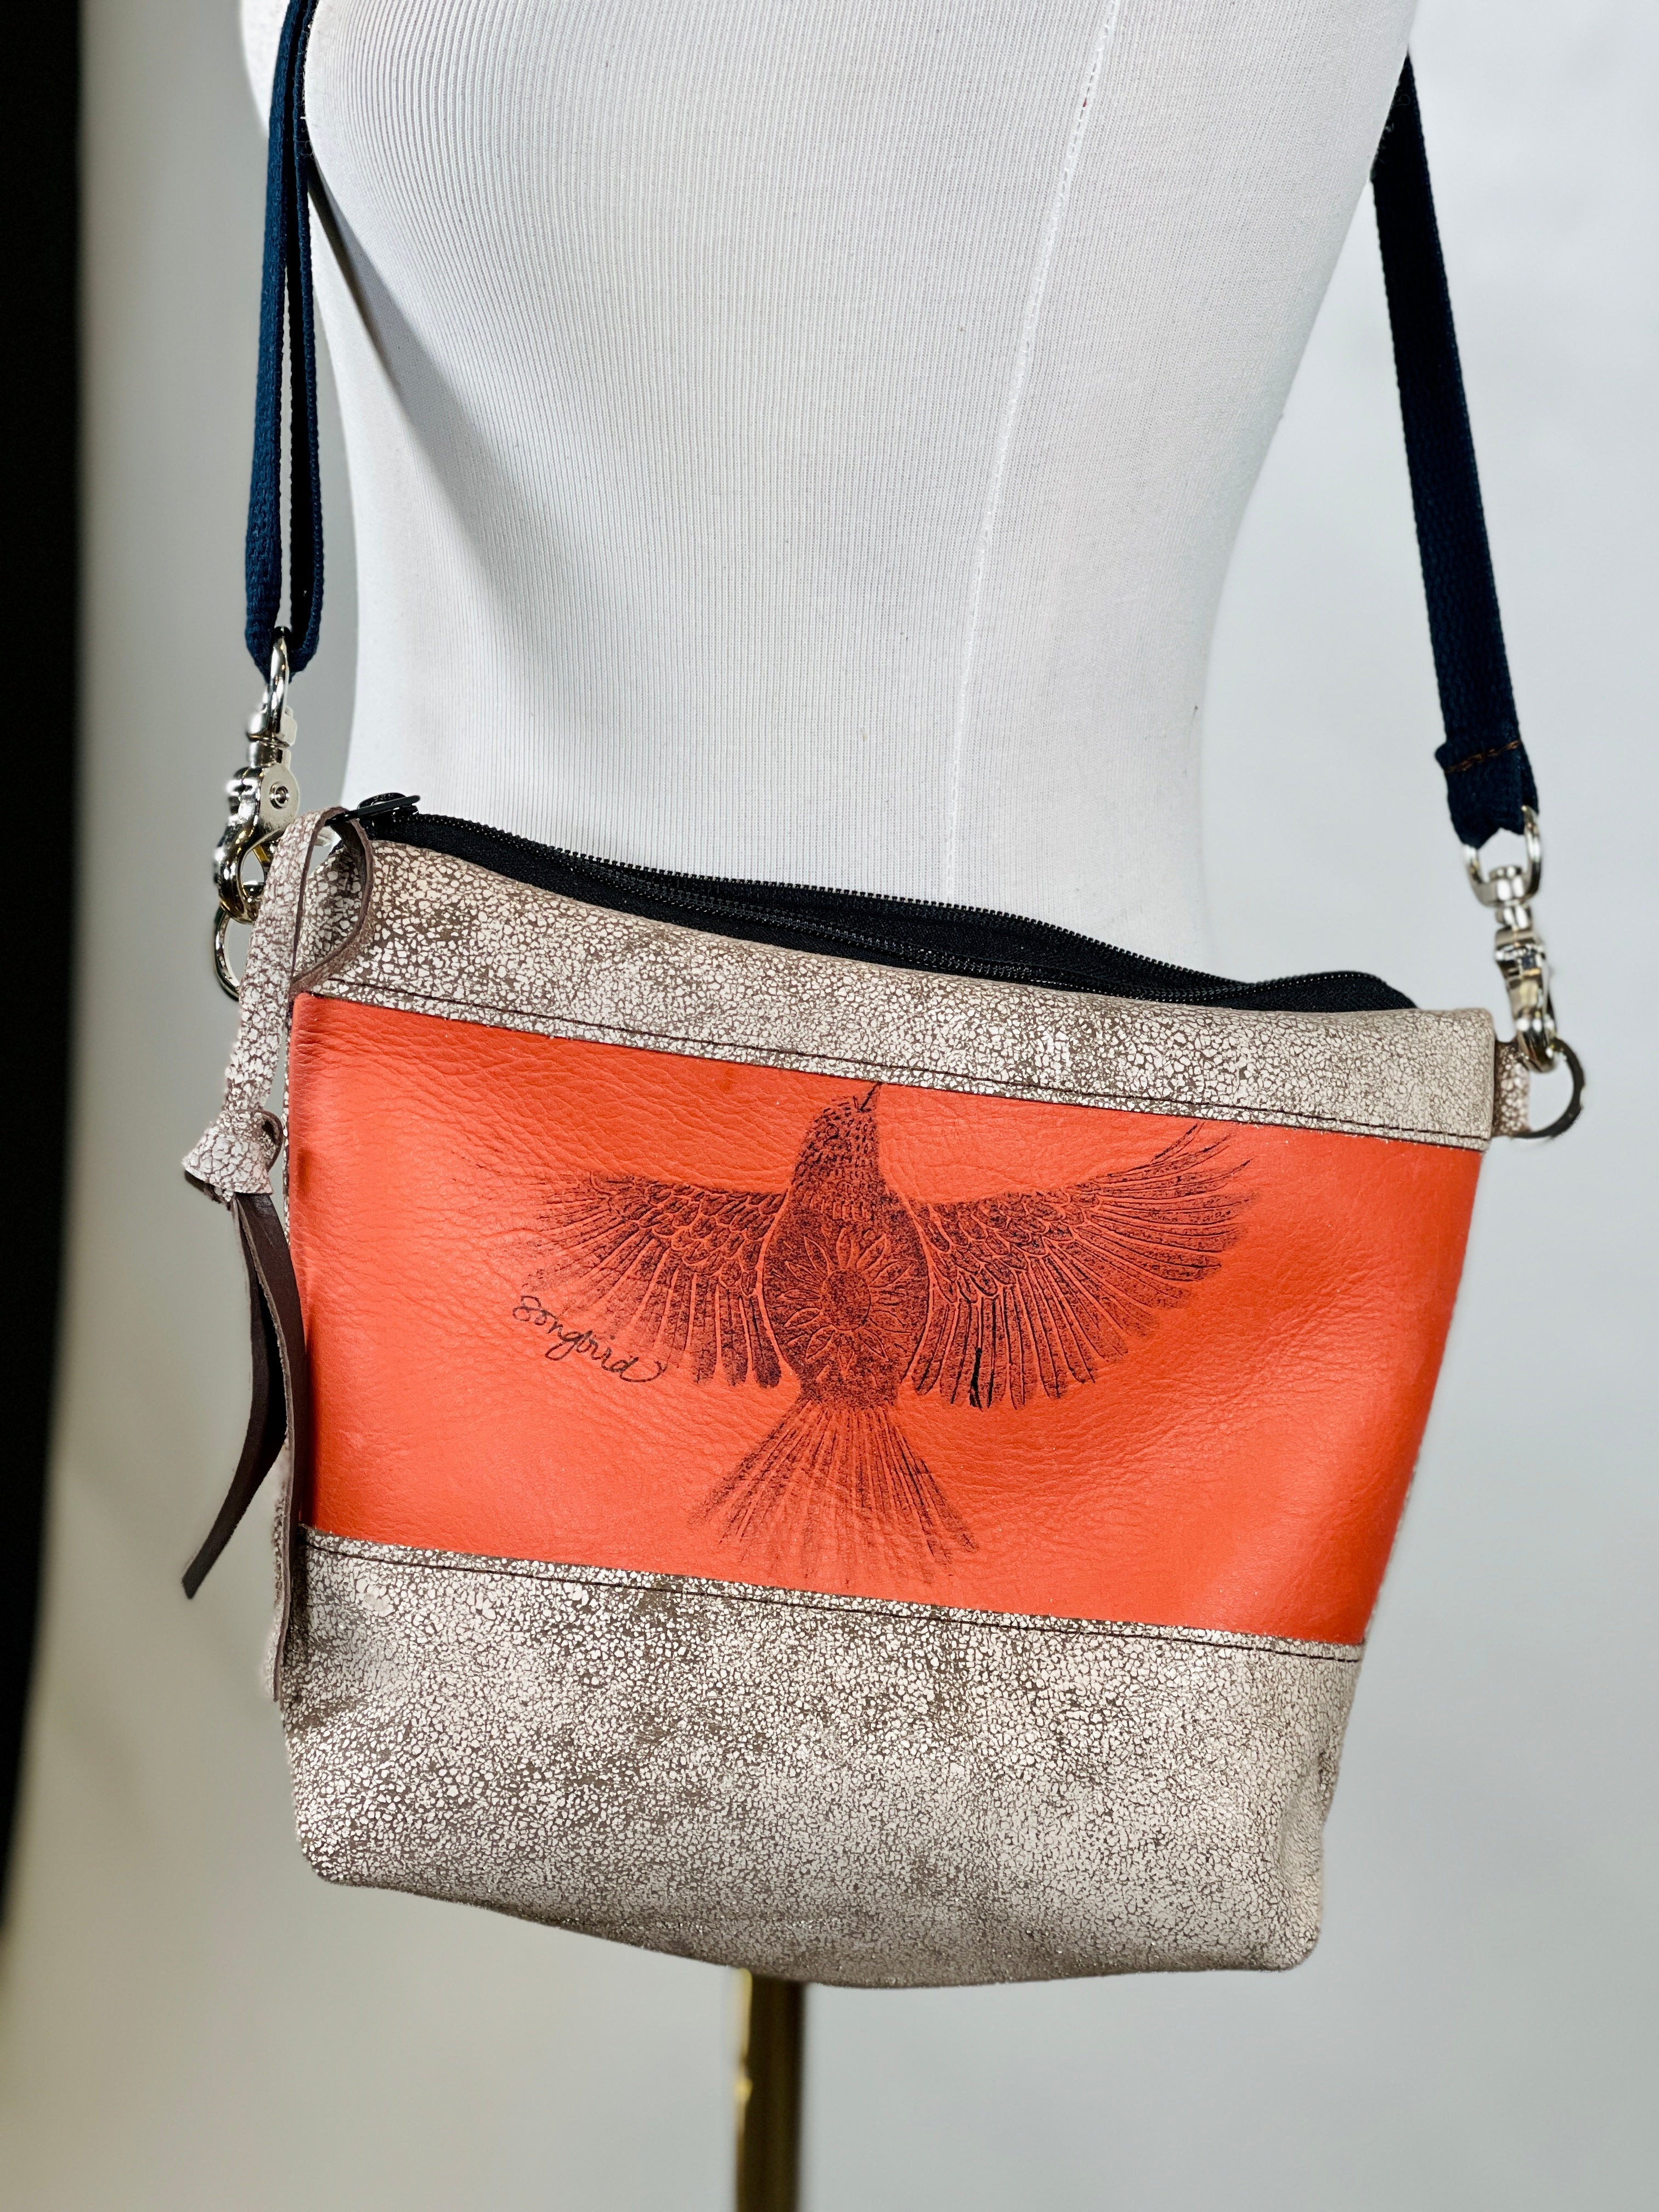 Distressed White Leather/Red Crossbody